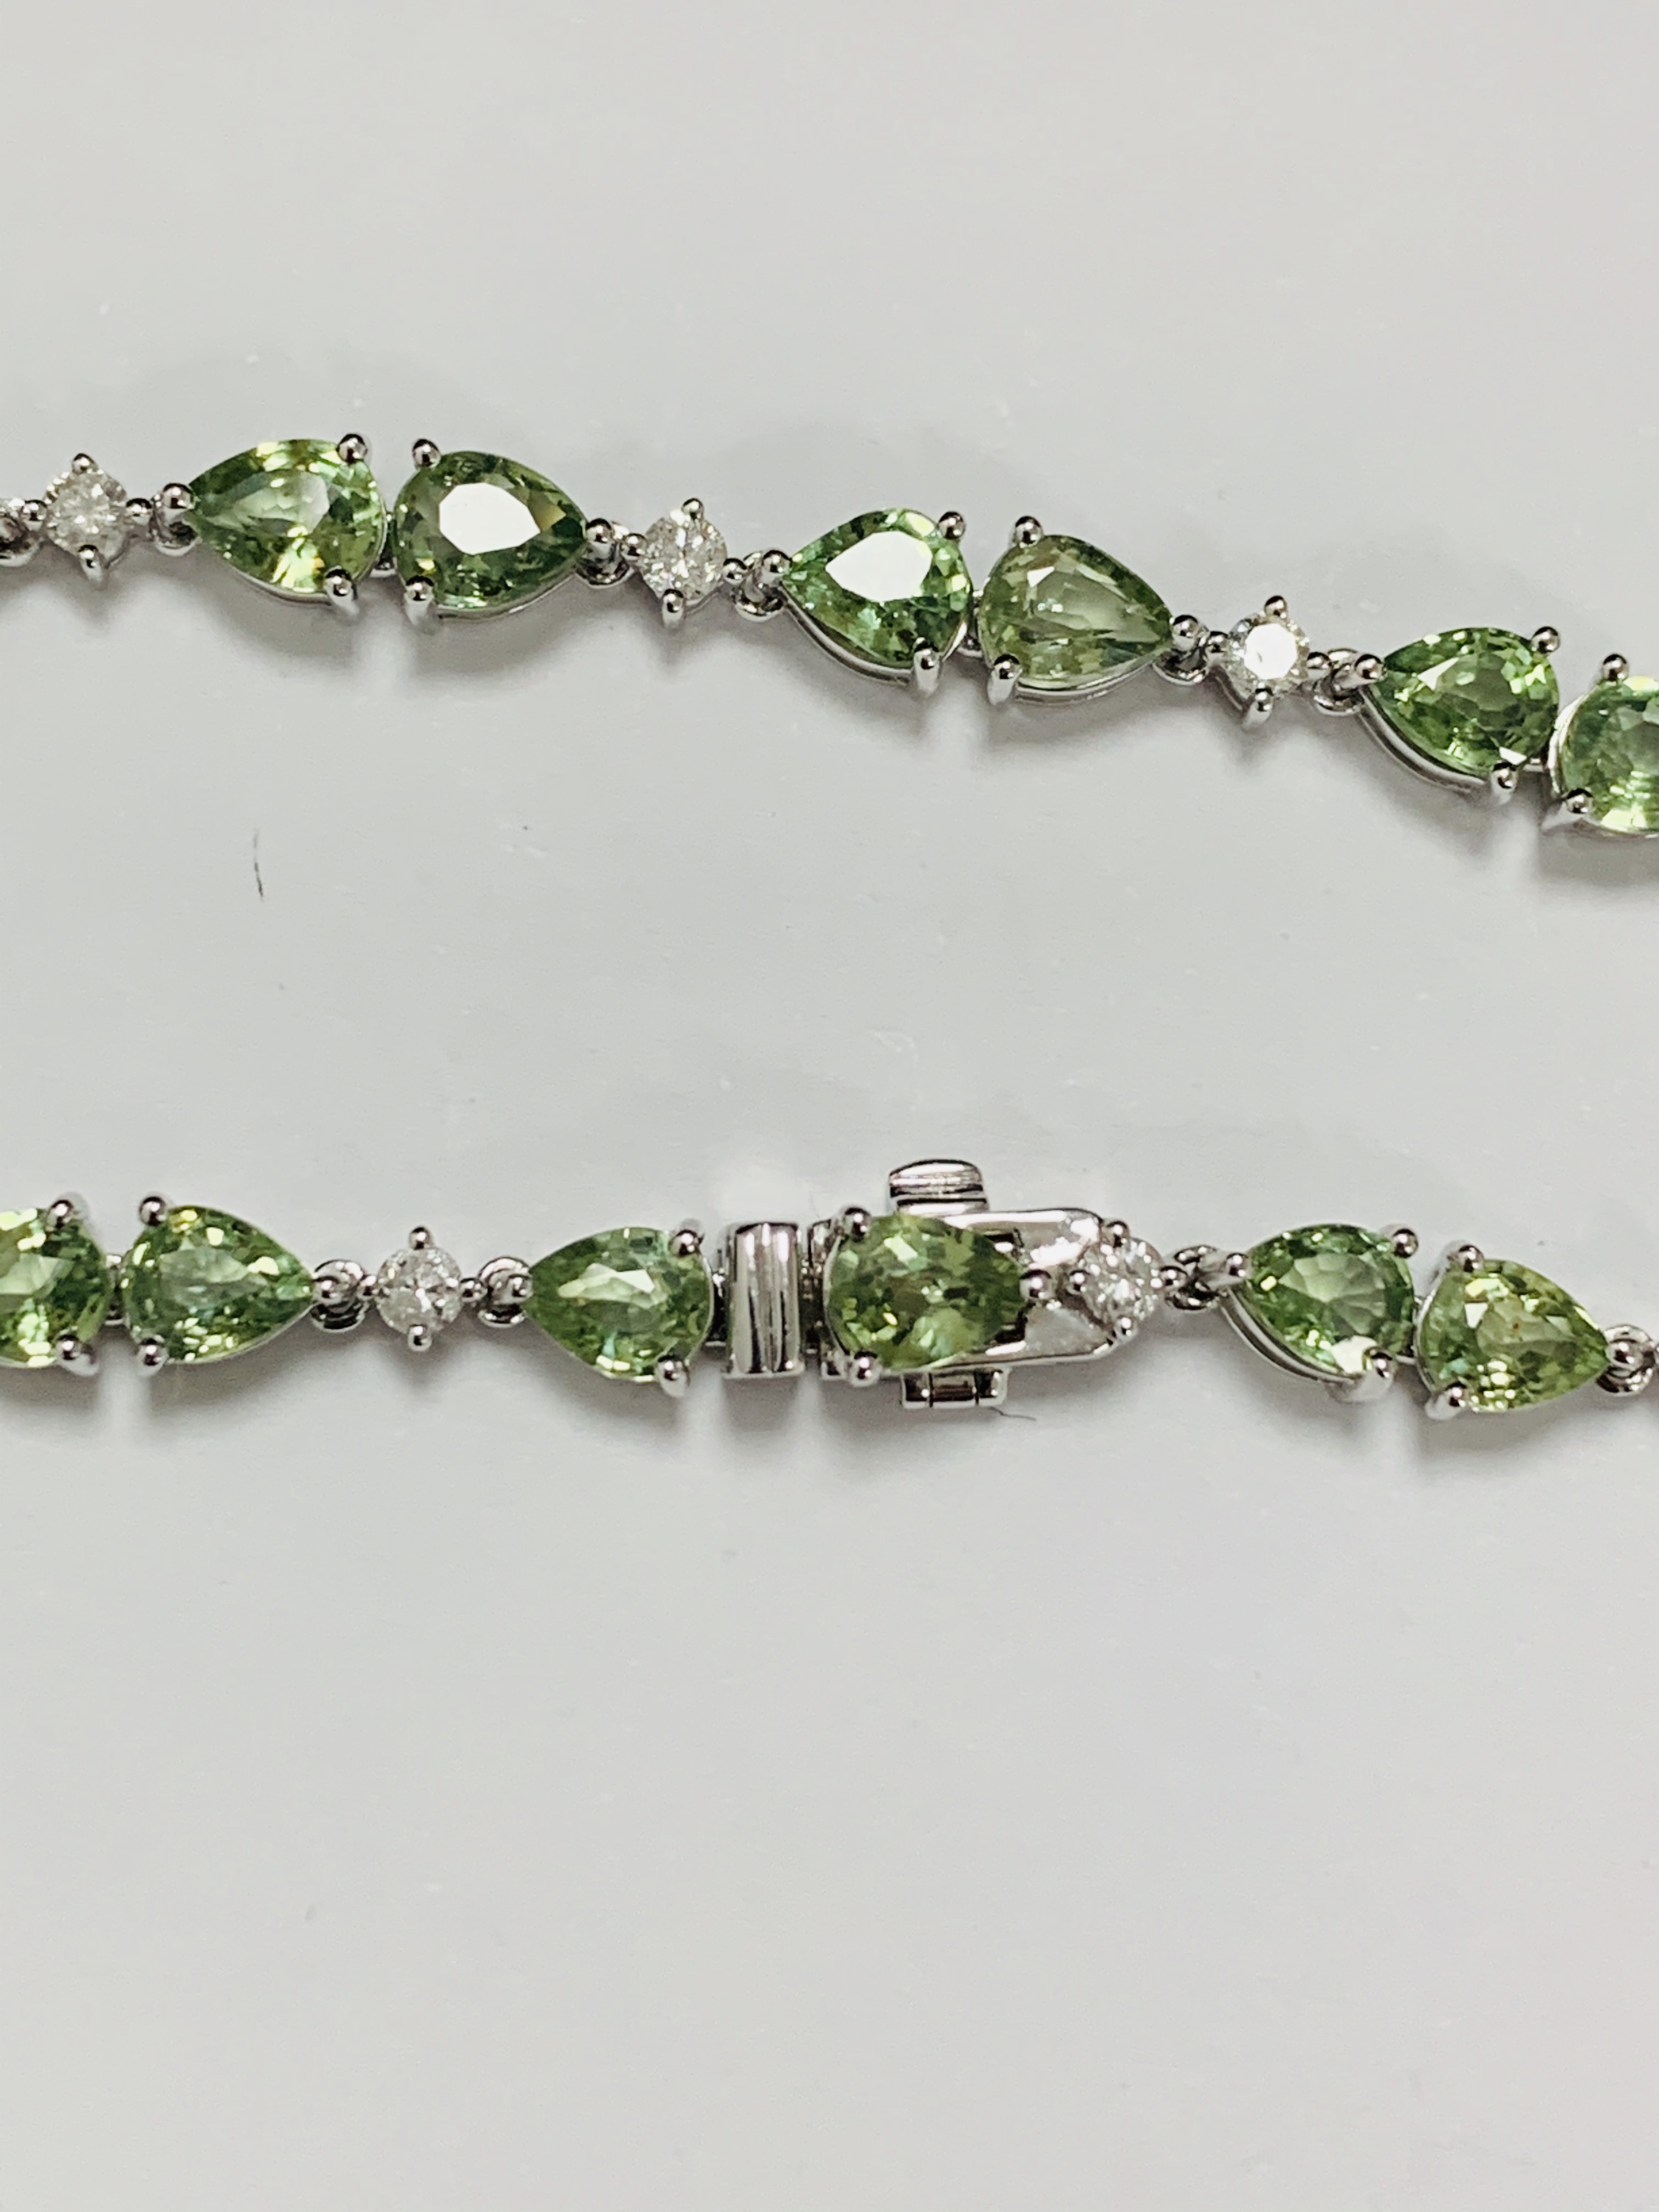 14ct White Gold Sapphire and Diamond bracelet featuring, 22 pear cut, light green Sapphires (9.05ct - Image 5 of 12